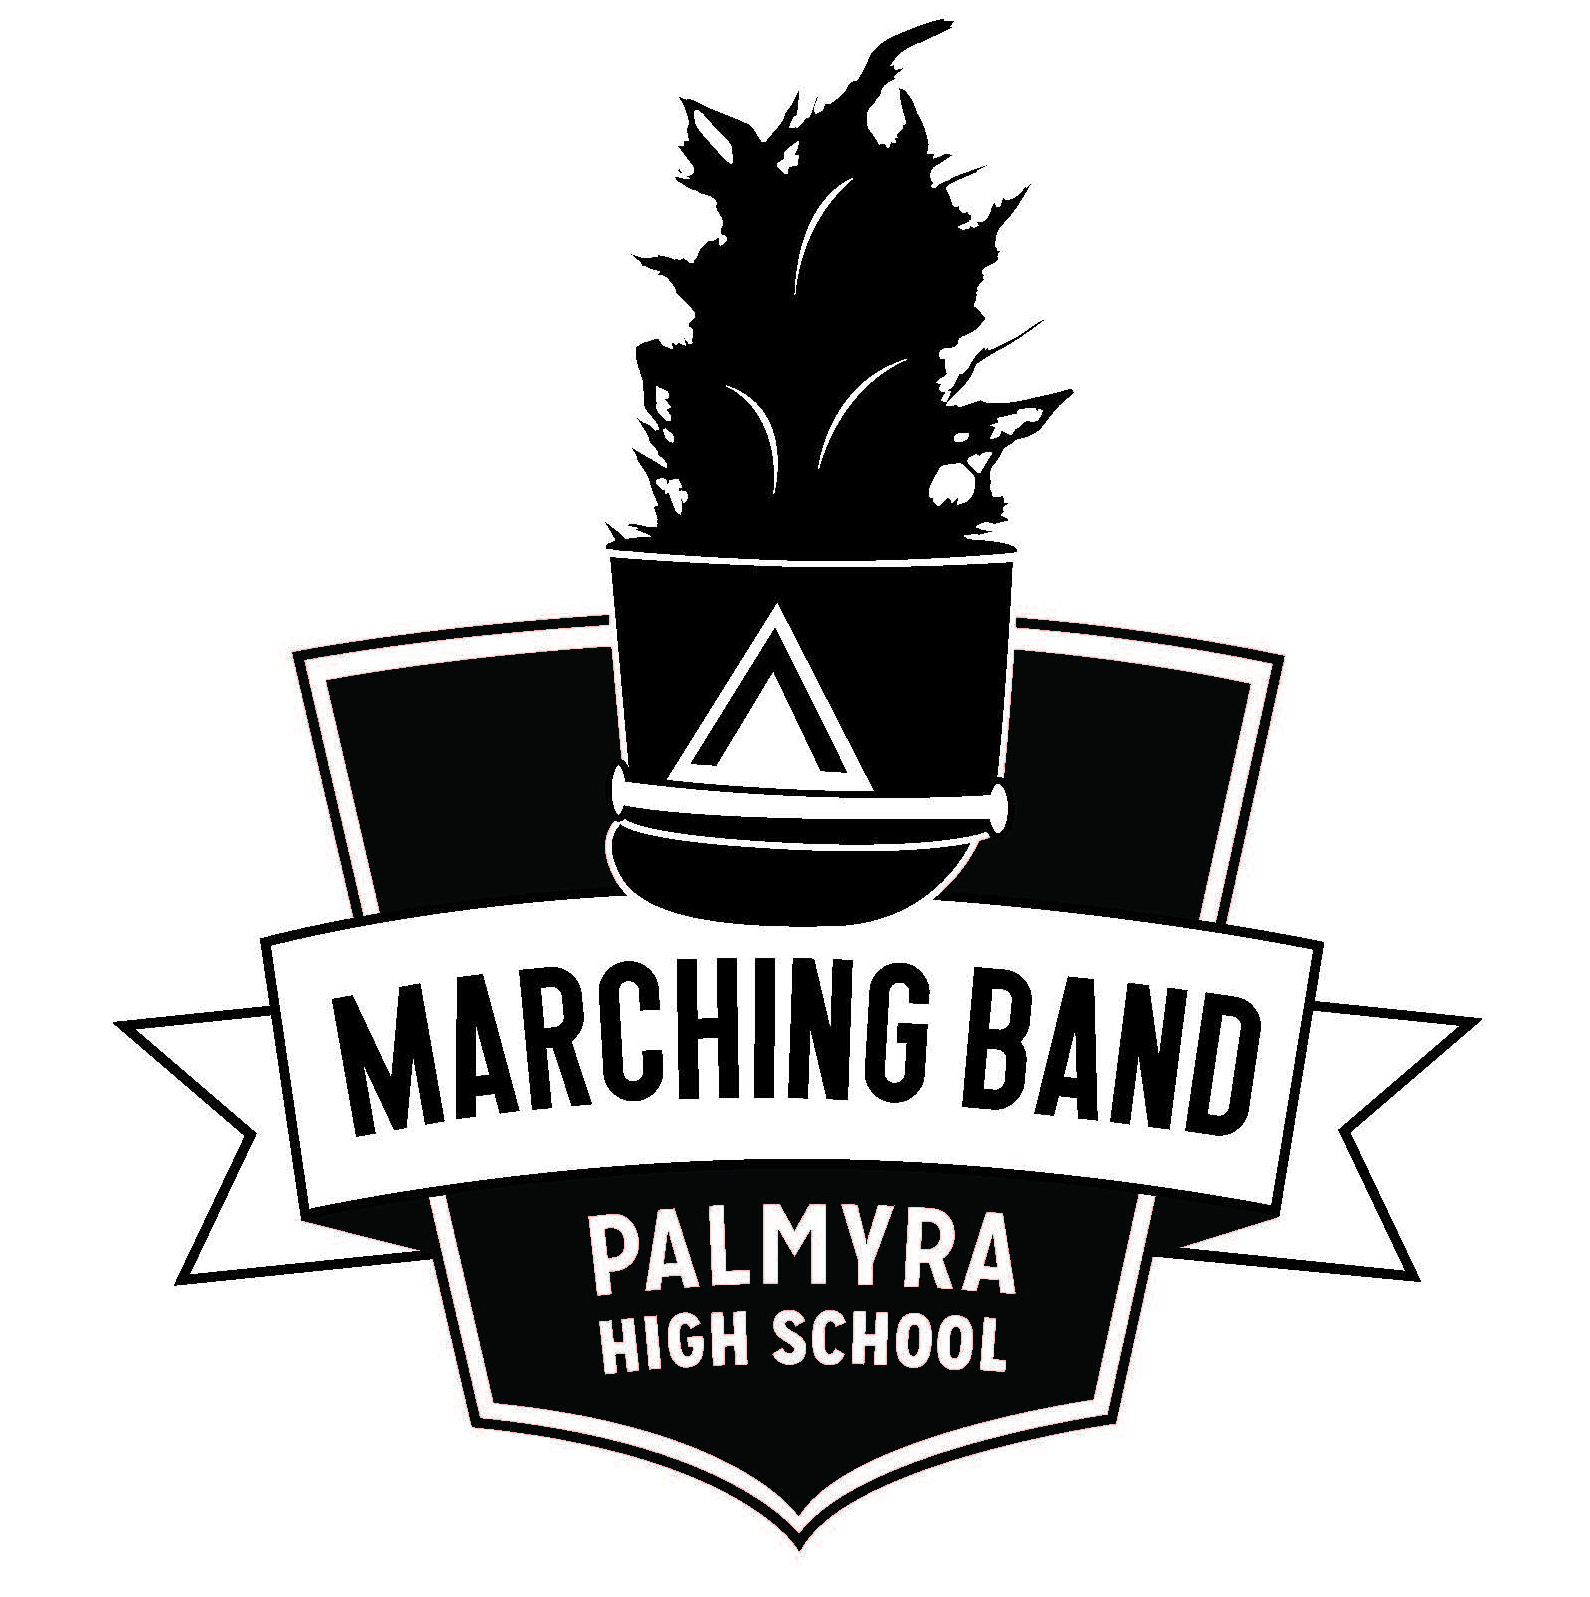 Marching Band logo with feathered cap and crest